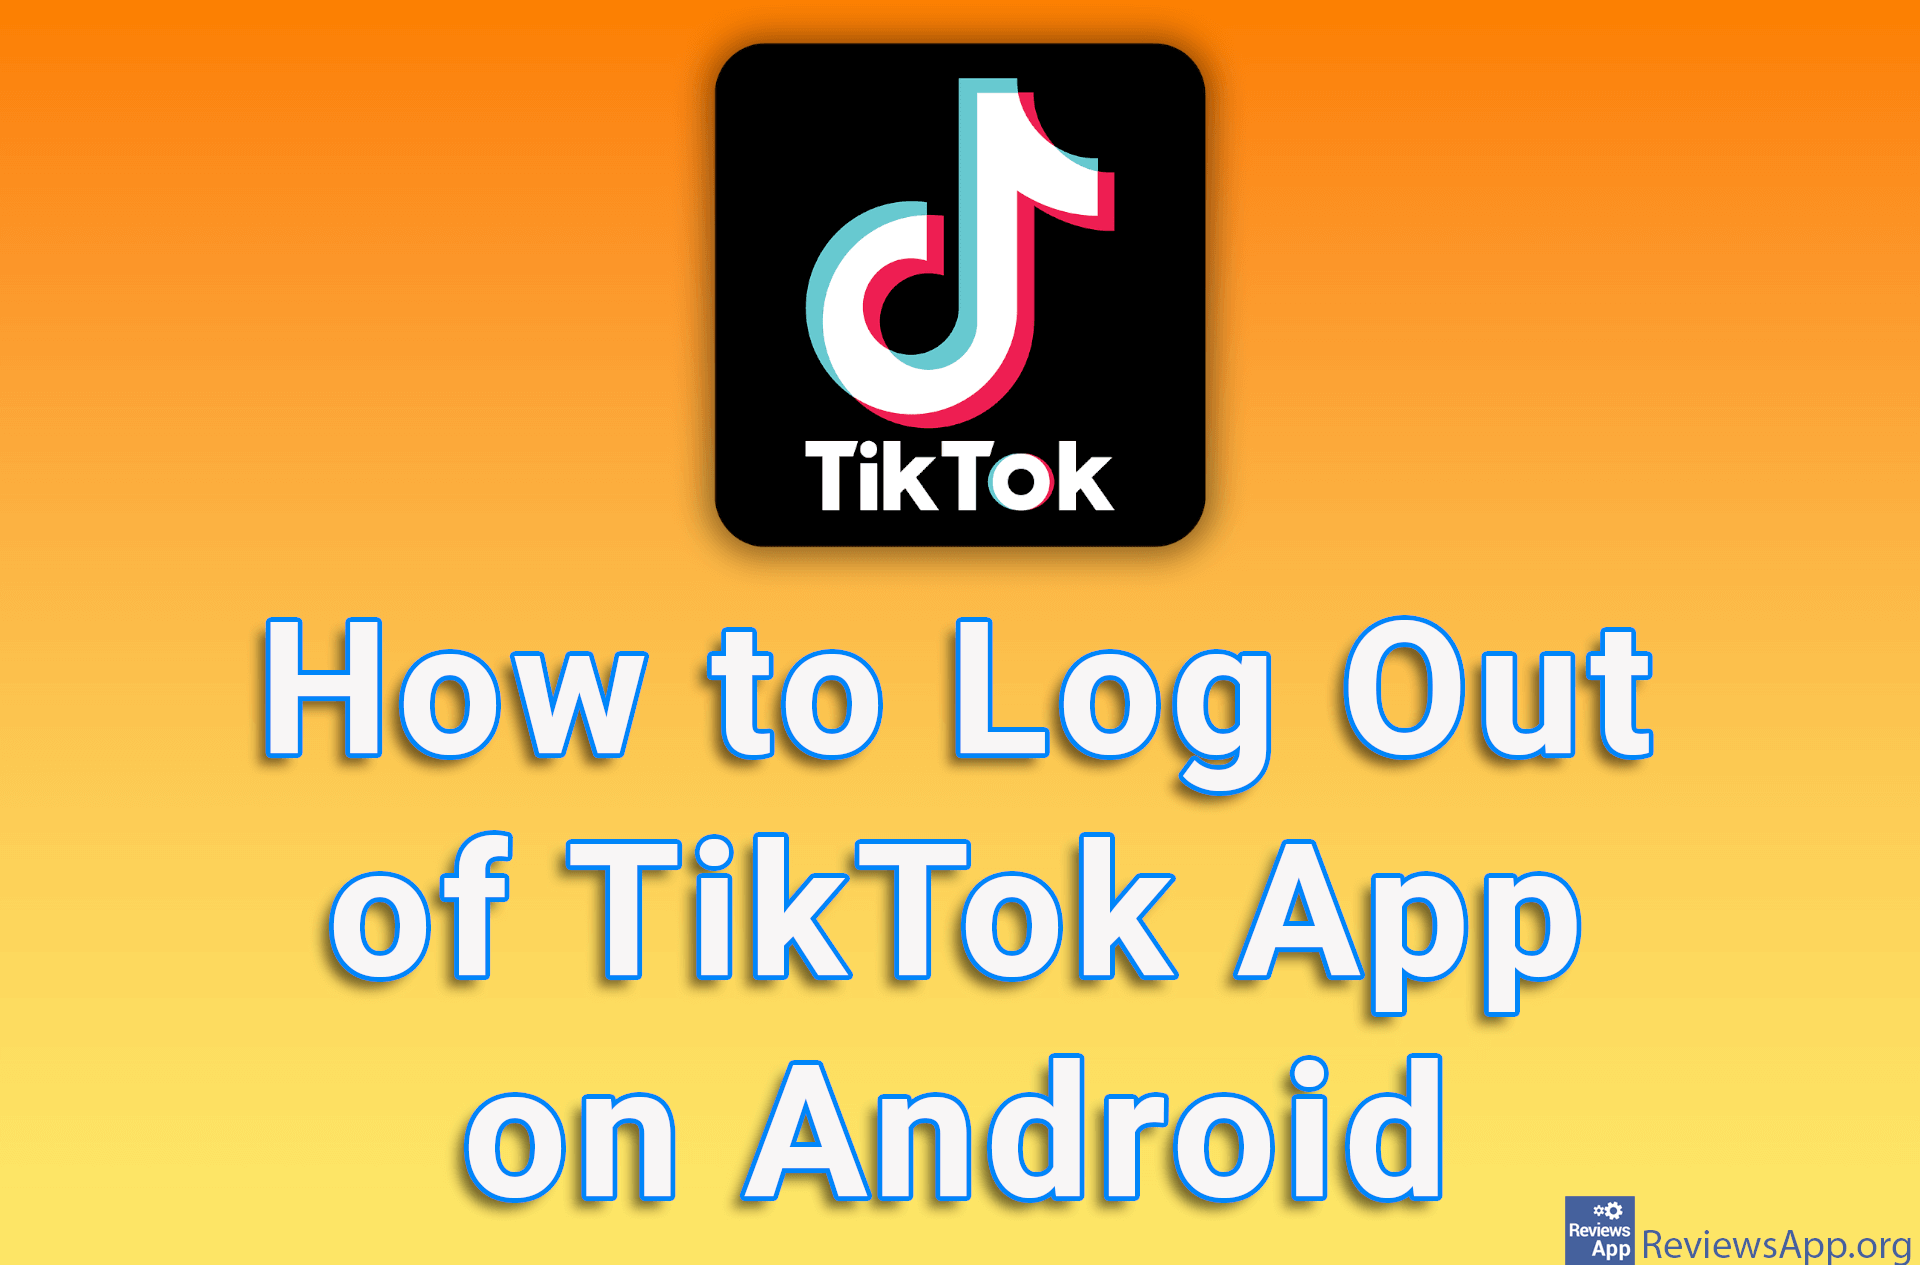 How to Log Out of TikTok App on Android